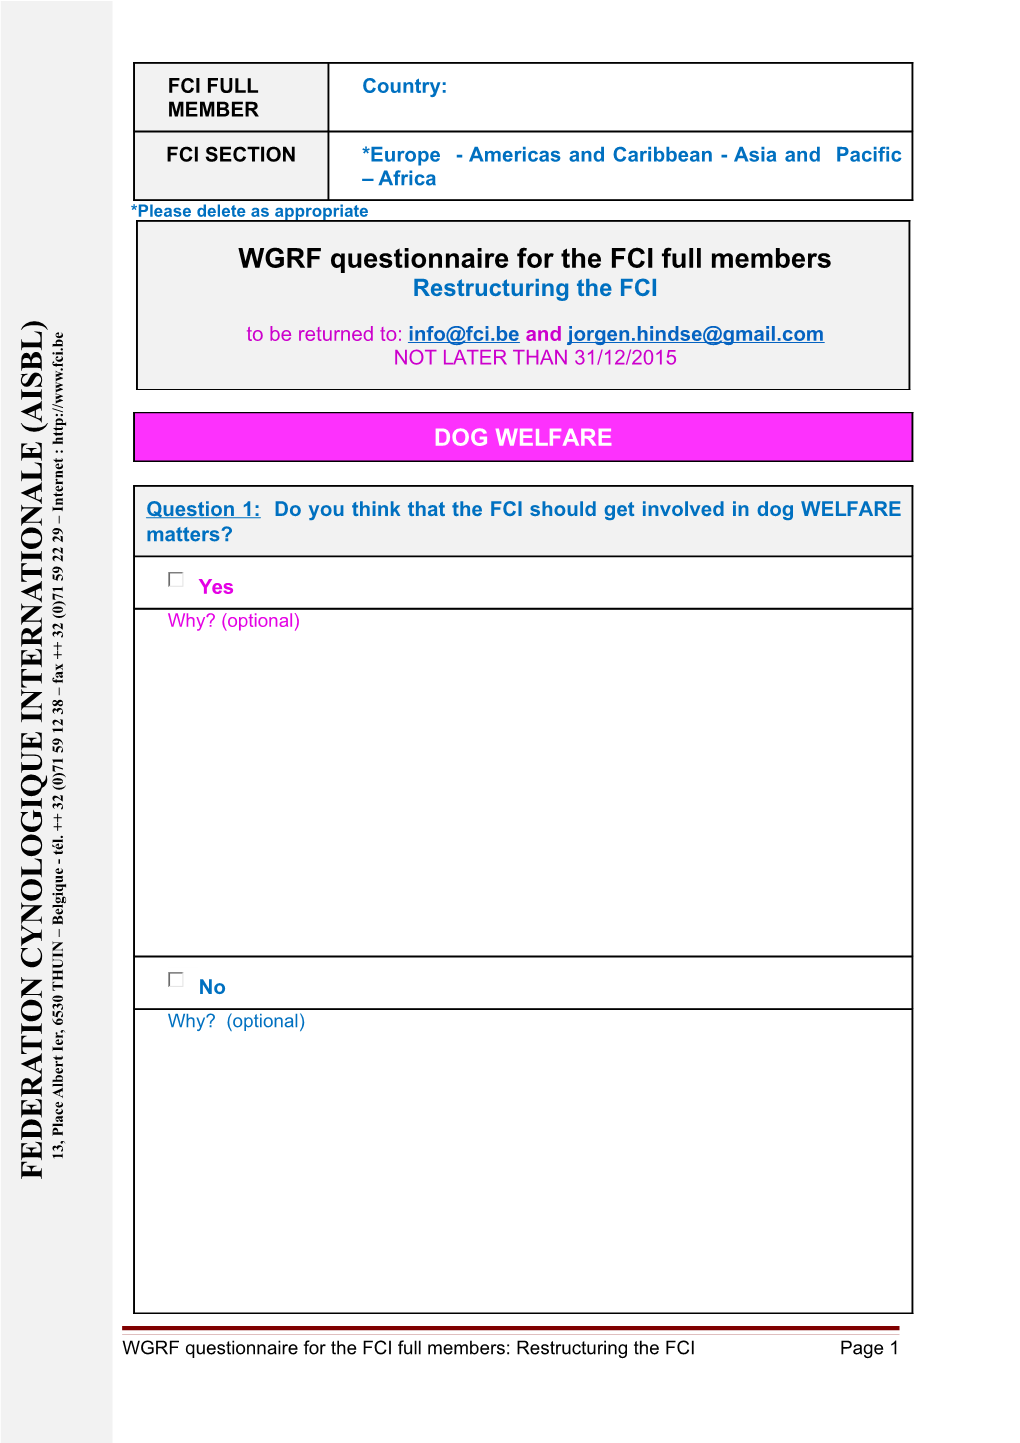 WGRF Questionnaire for the FCI Full Members: Restructuring the FCI Page 1